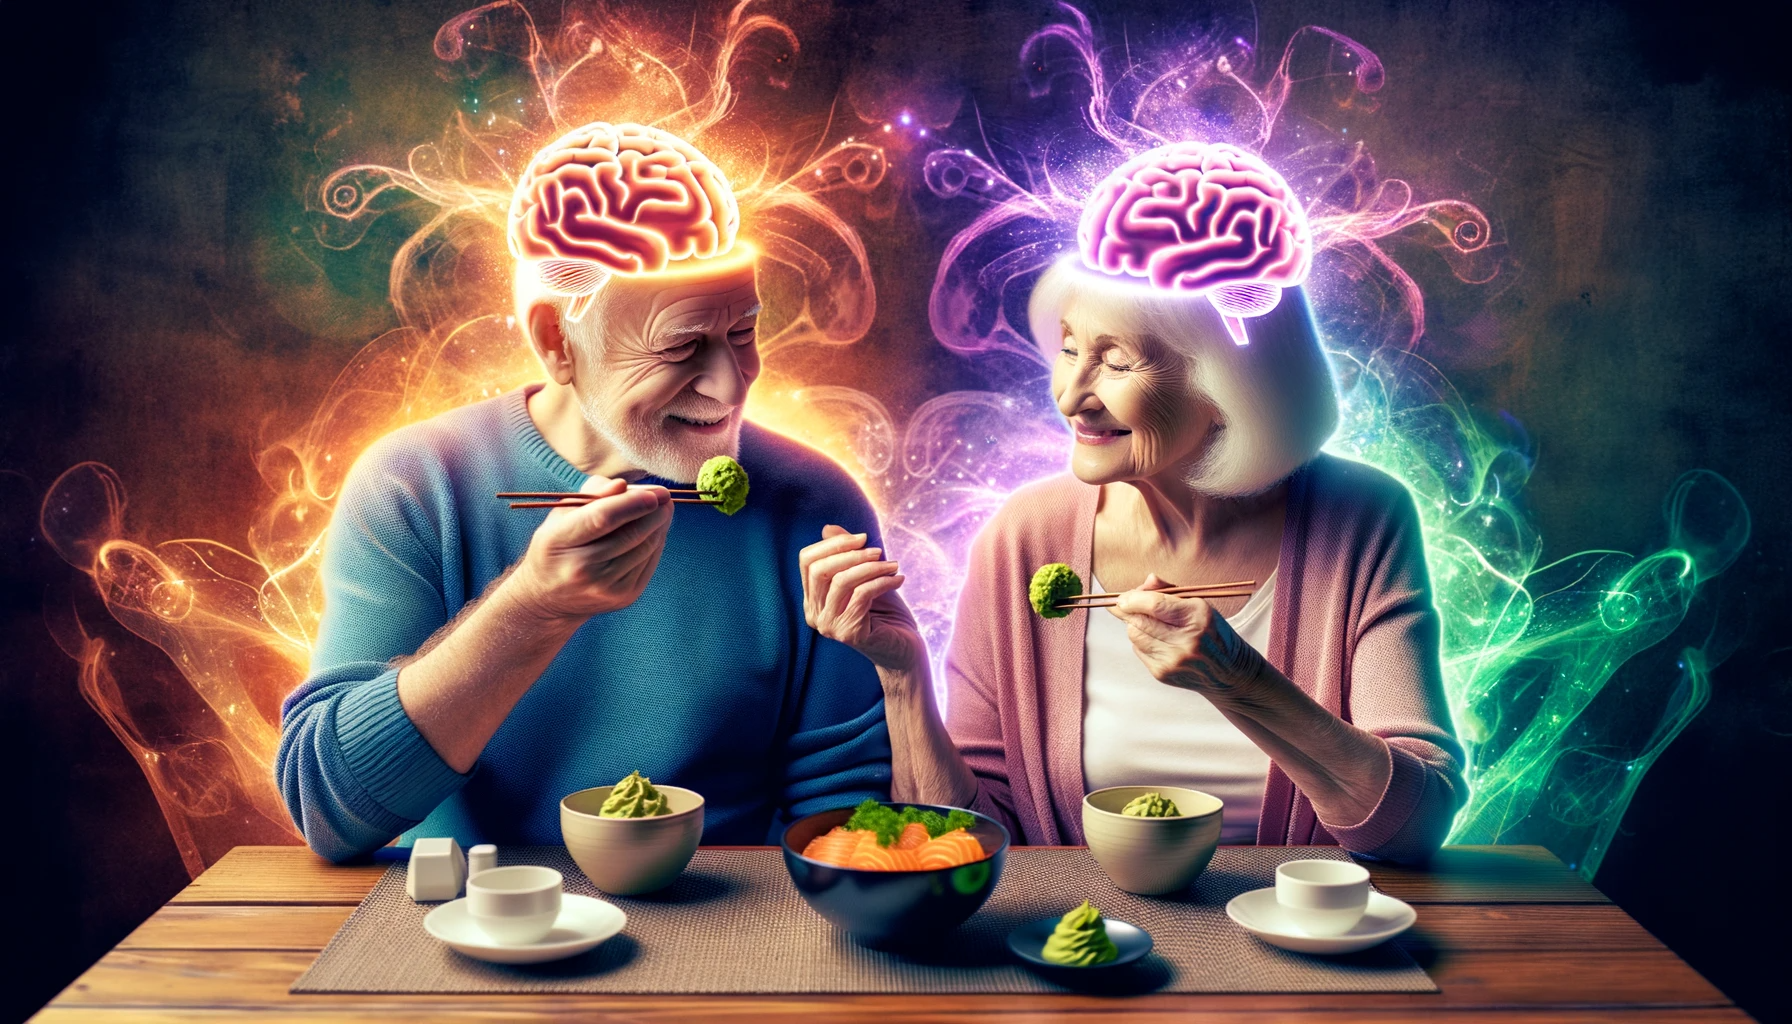 Study: Benefits of Wasabi Supplements with 6-MSITC (6-Methylsulfinyl Hexyl Isothiocyanate) on Memory Functioning in Healthy Adults Aged 60 Years and Older: Evidence from a Double-Blinded Randomized Controlled Trial. Image Credit: Created with the assistance of DALL·E